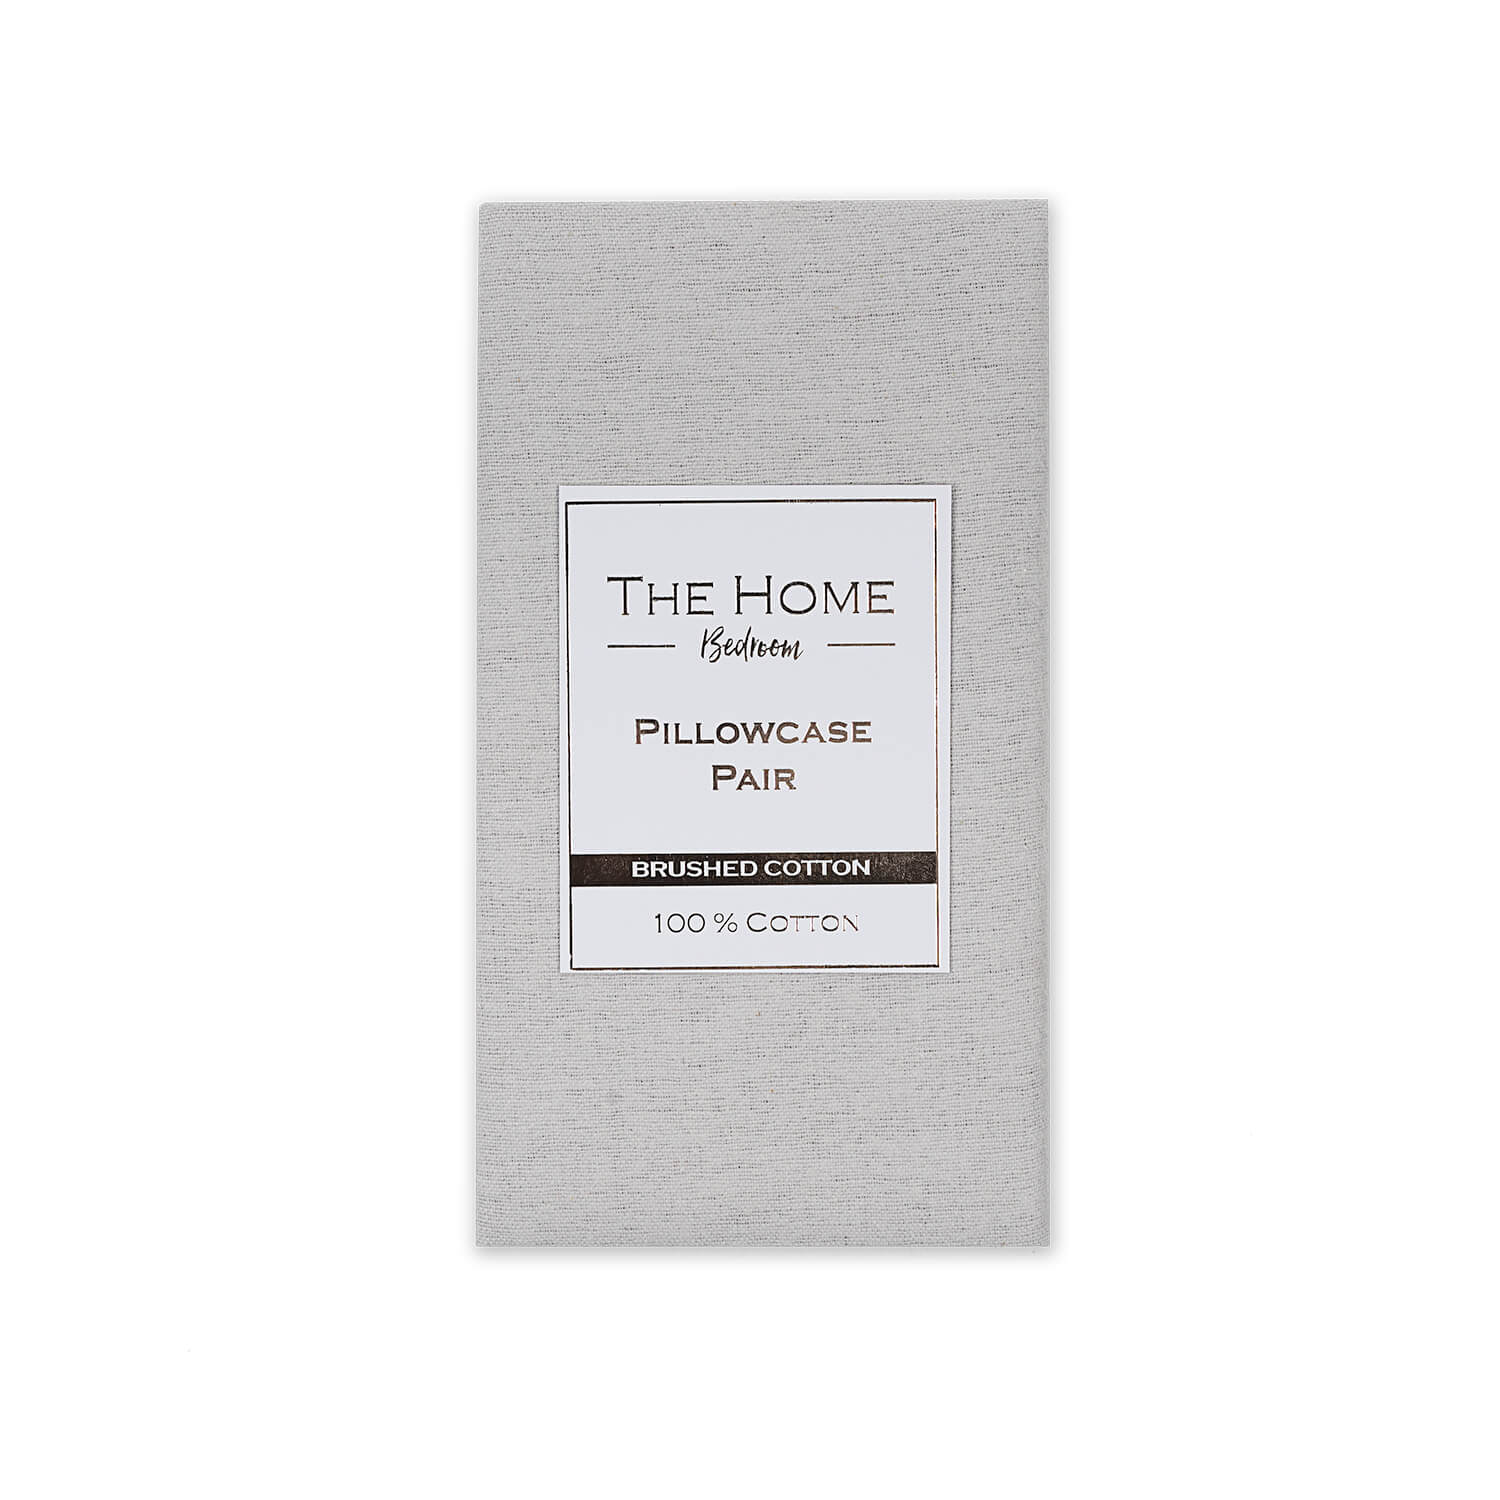 The Home Bedroom 100% Brushed Cotton Pillowcase Pair - Grey 1 Shaws Department Stores